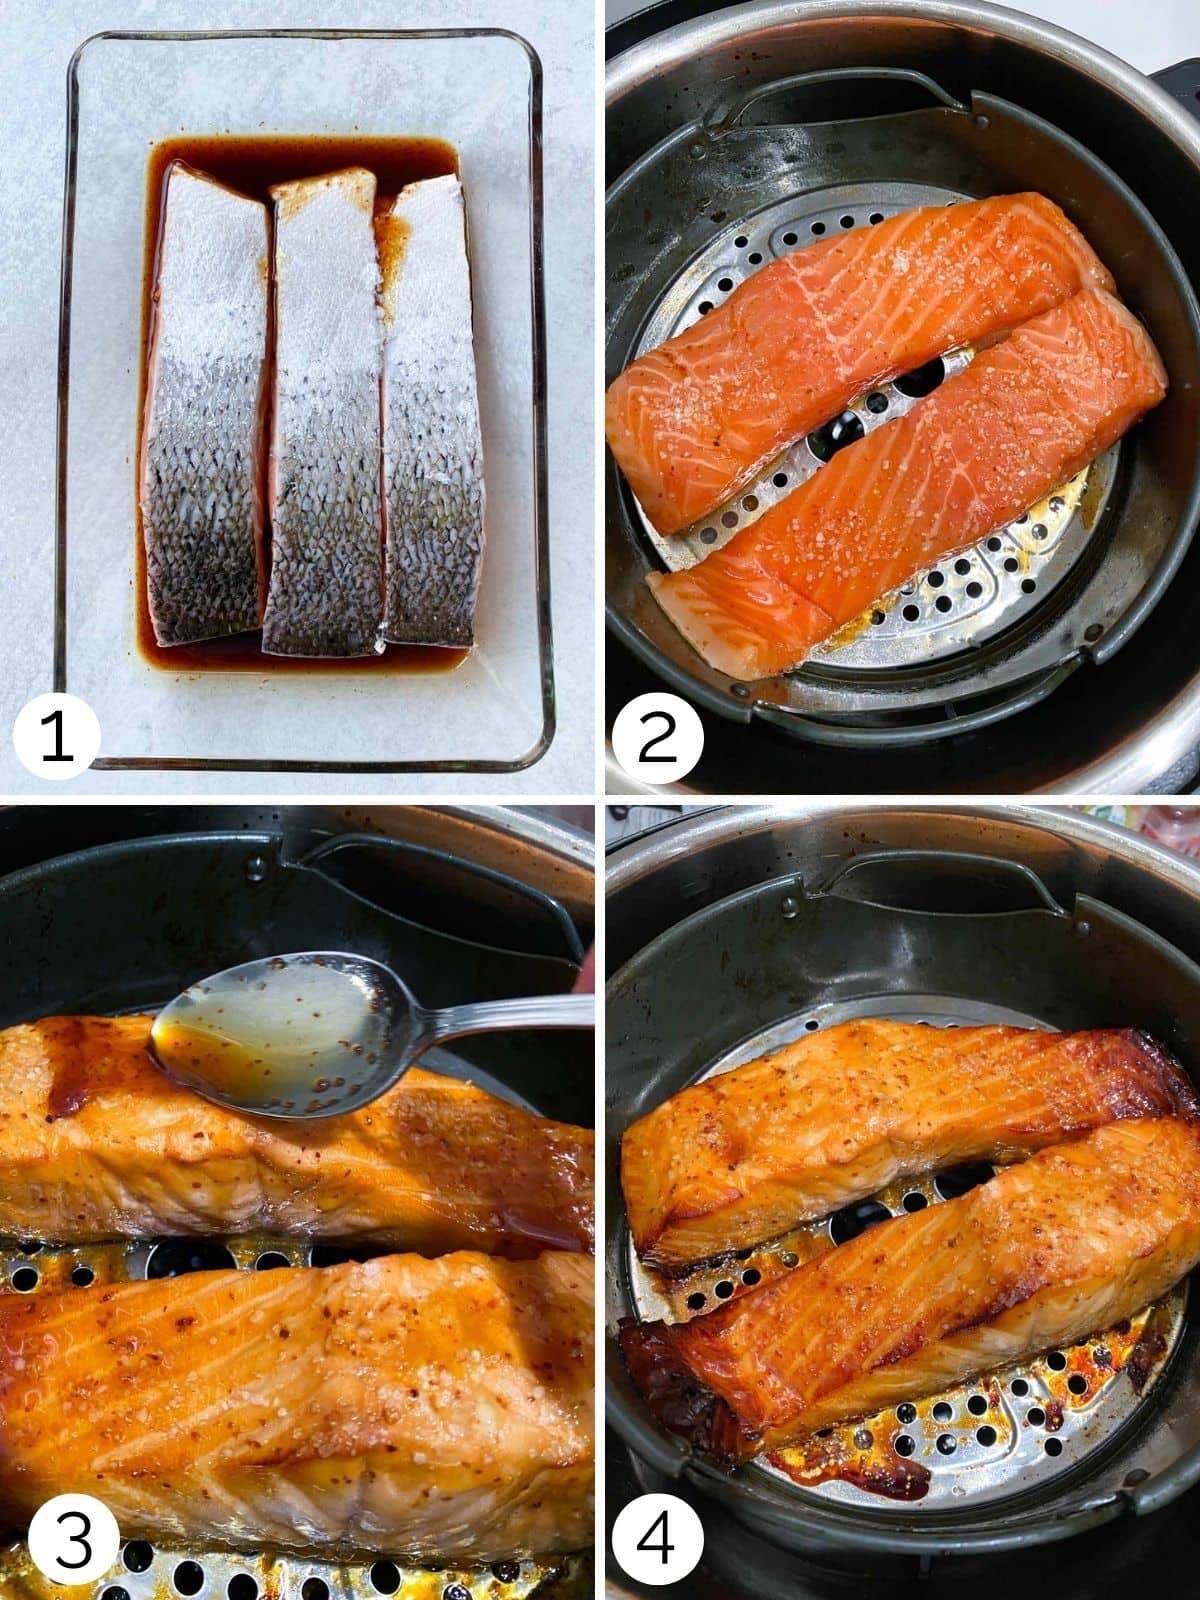 Marinating and cooking salmon fillets in an air fryer.